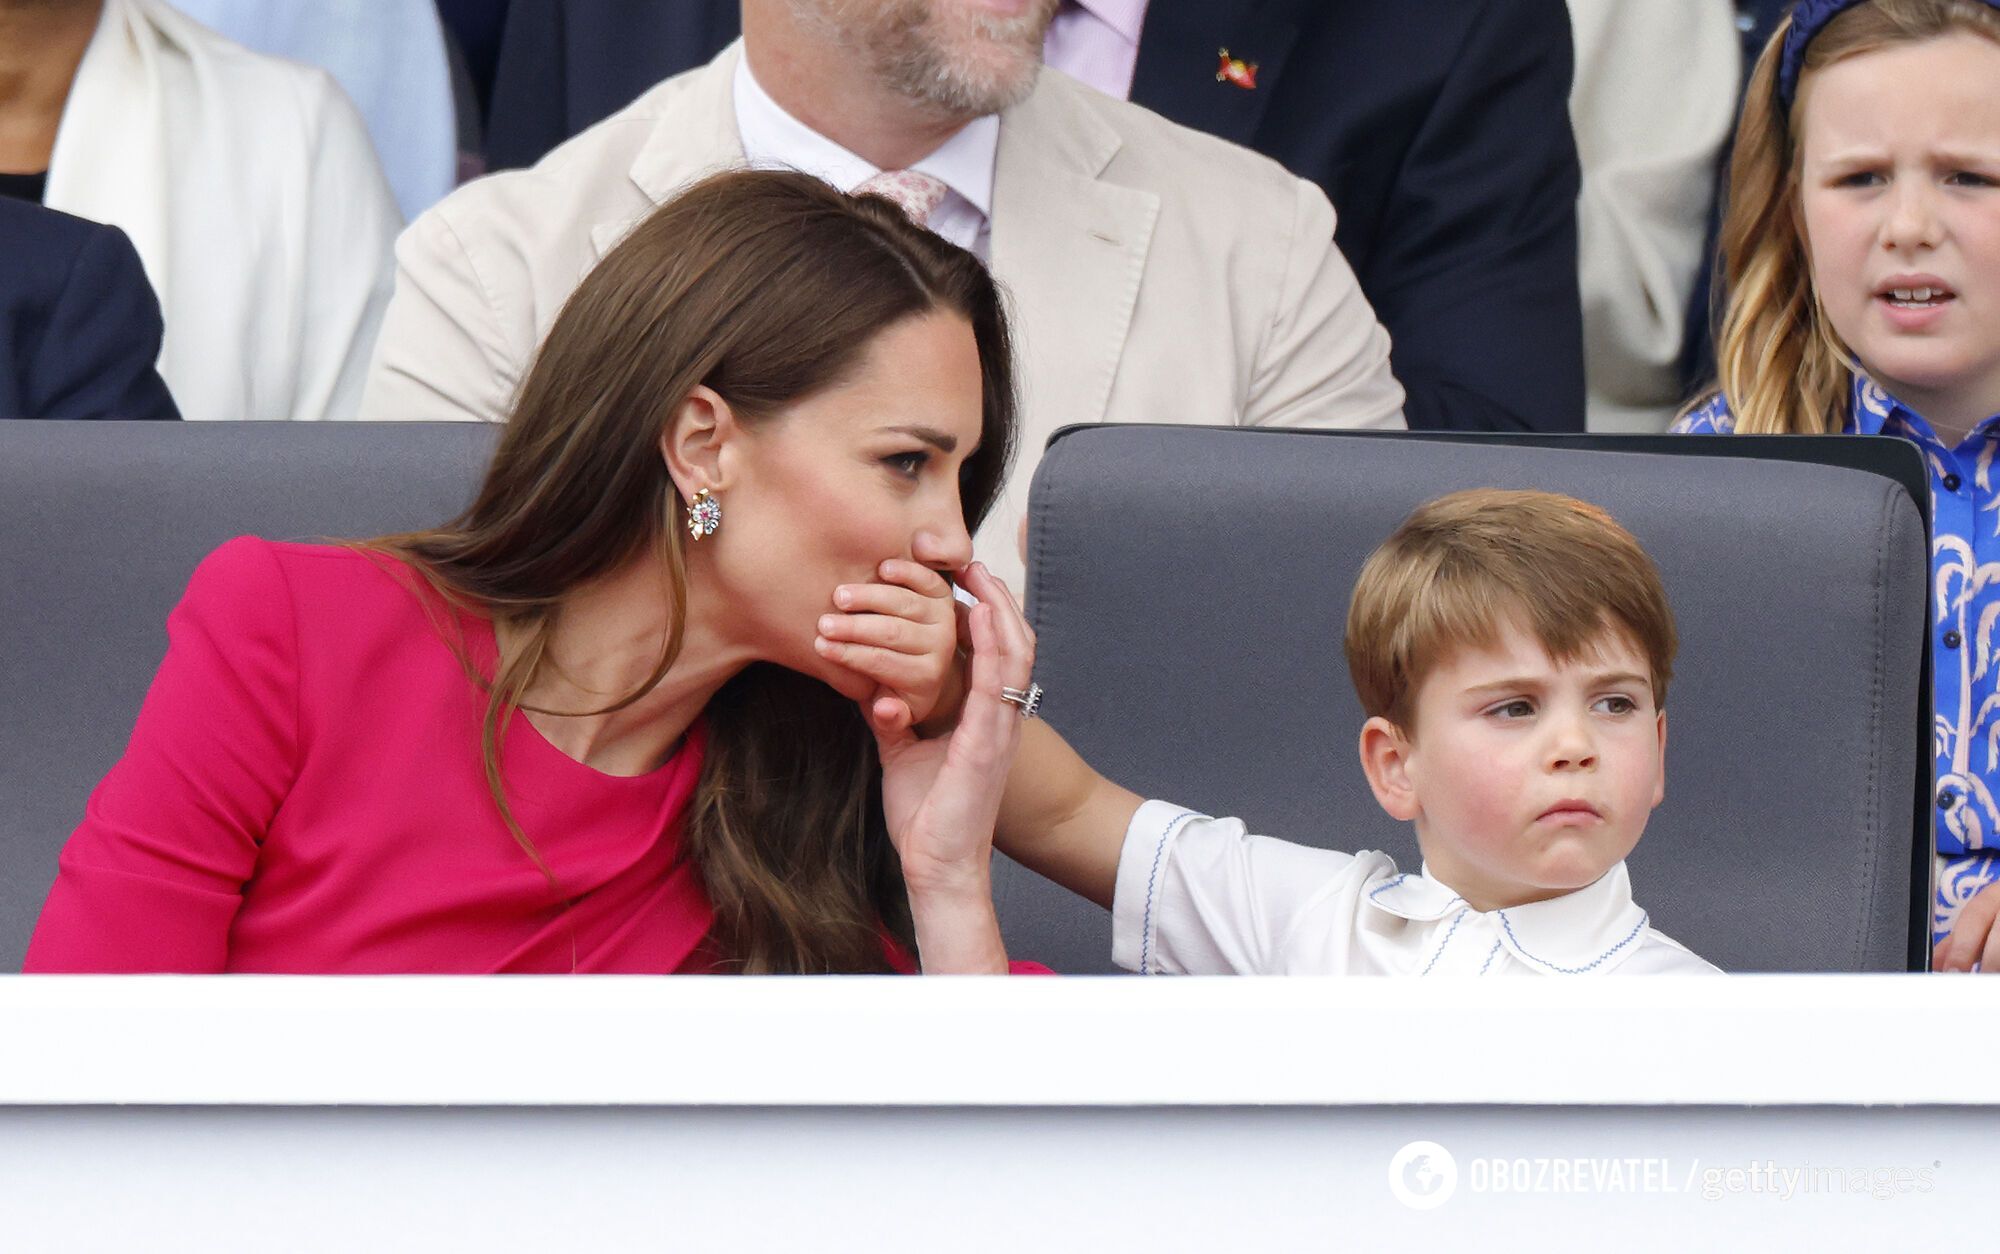 It has been revealed why Kate Middleton's children did not visit her in hospital after abdominal surgery